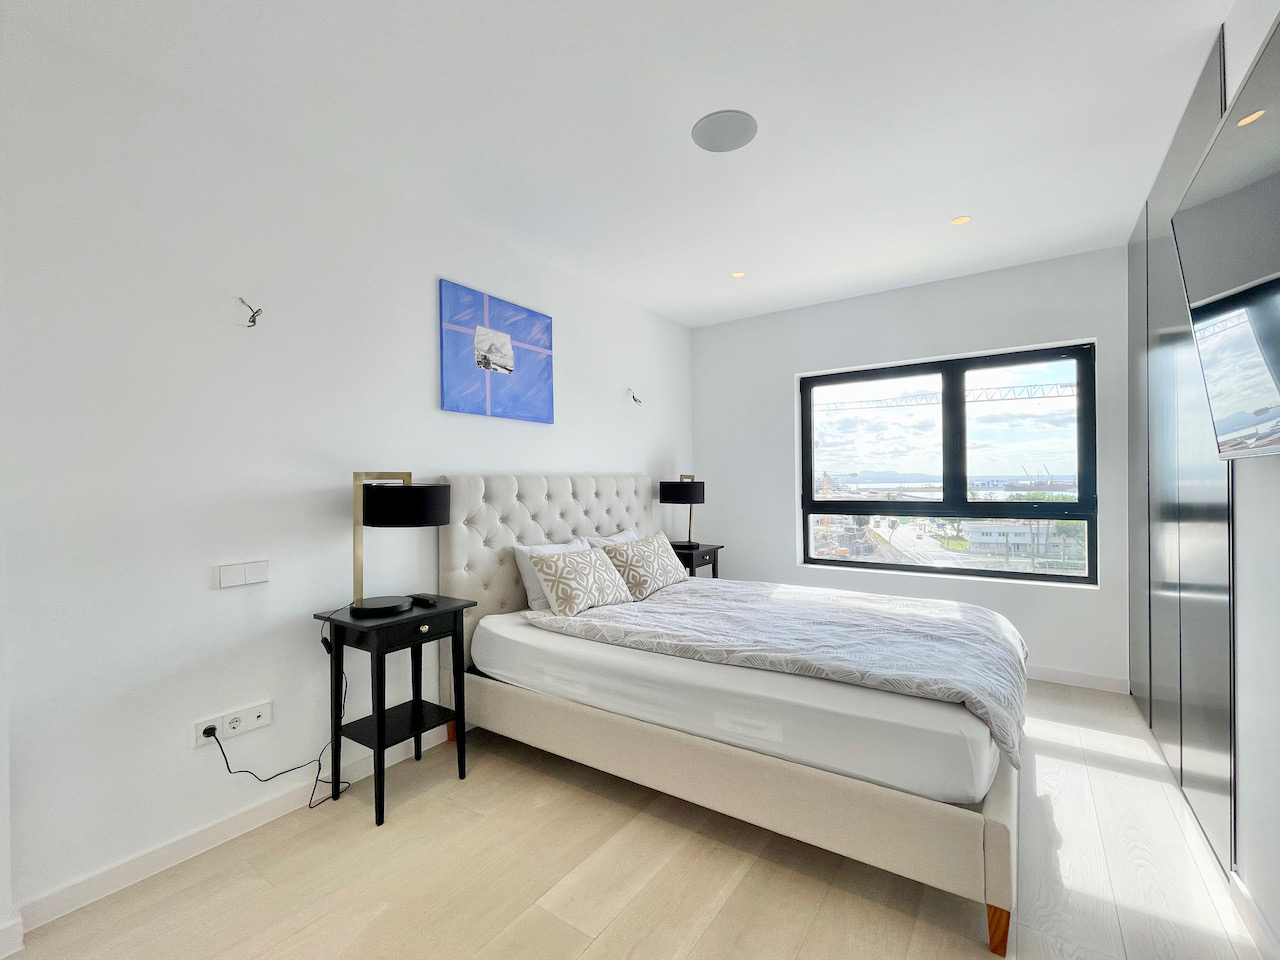 Designer flat on the seafront, fully equipped and fully refurbished with stunning views of the cathedral and the sea